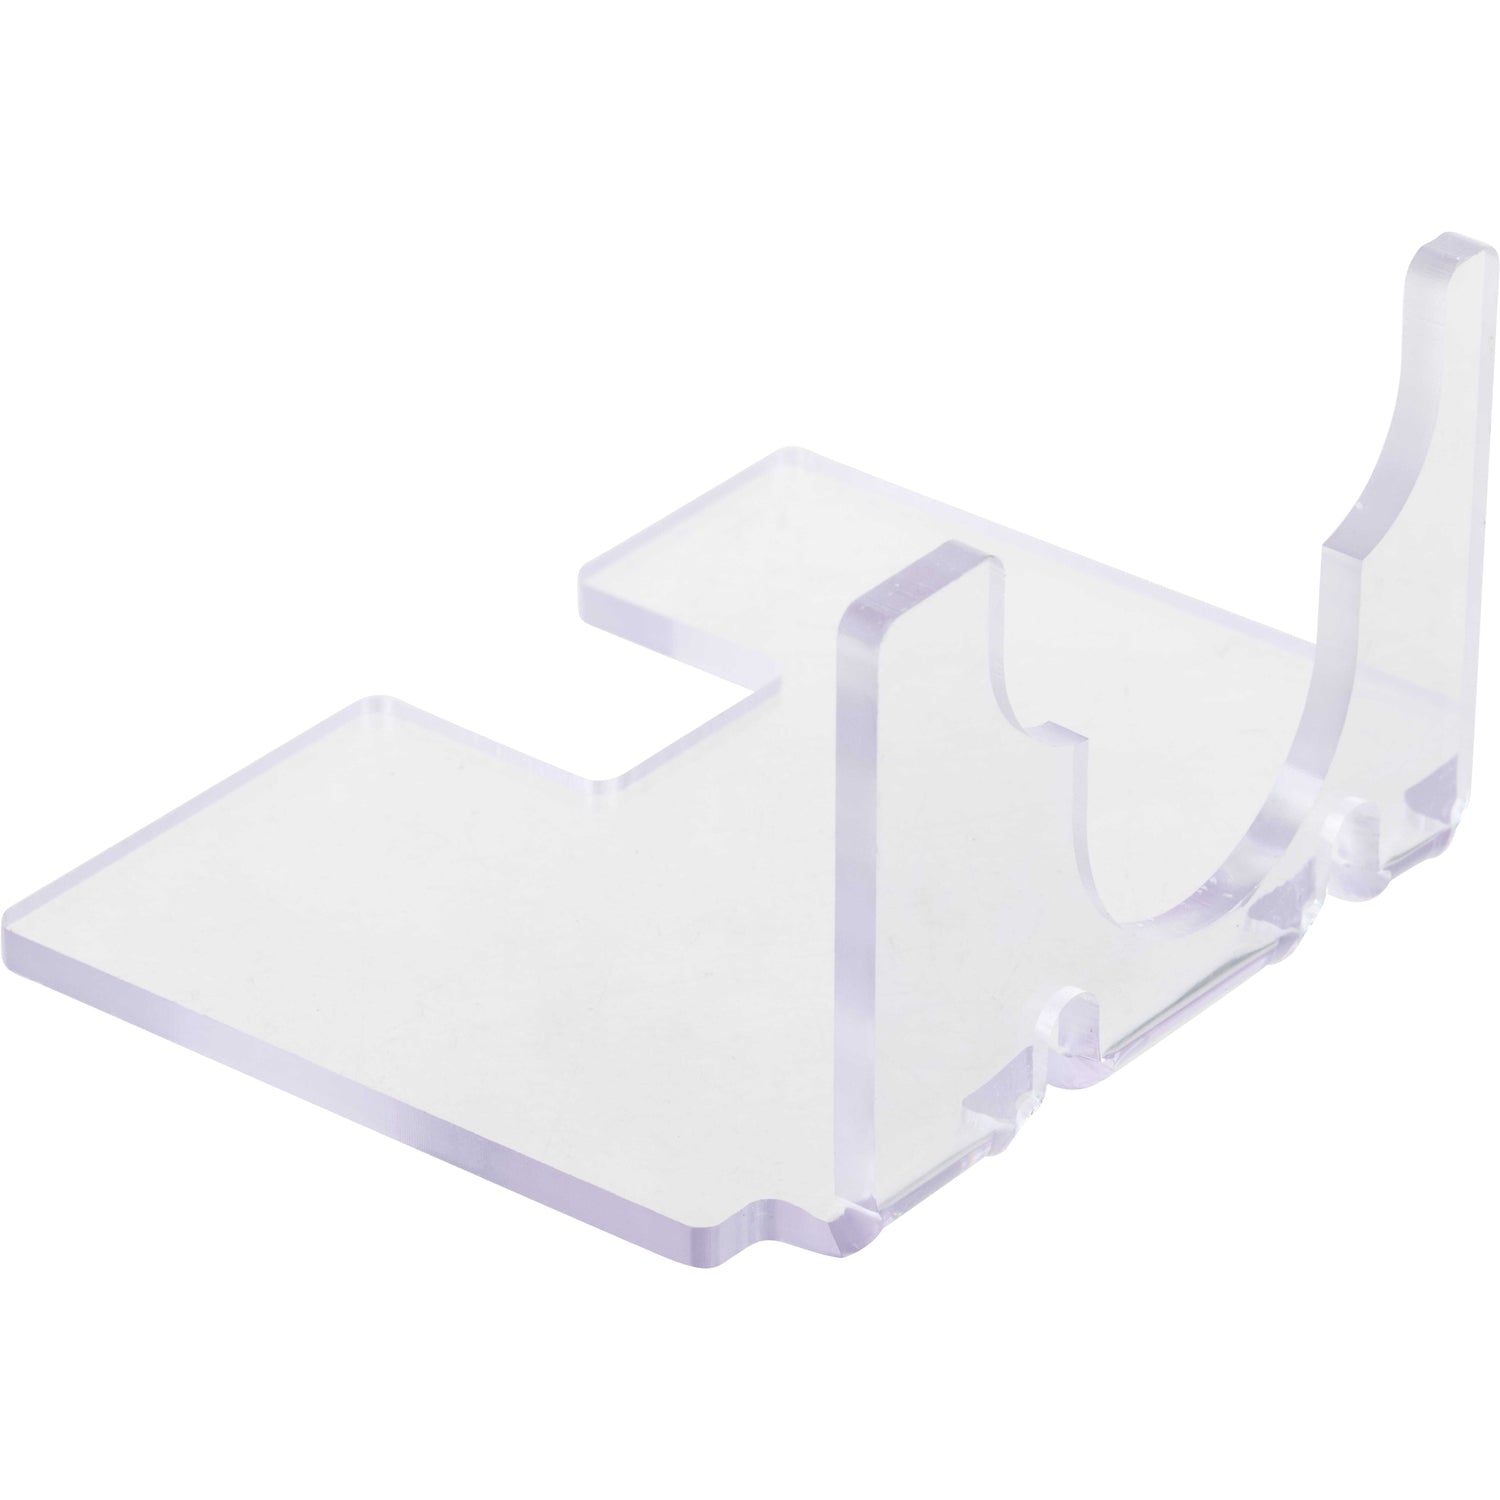 Clear bent polycarbonate guarding shown on a white background. 